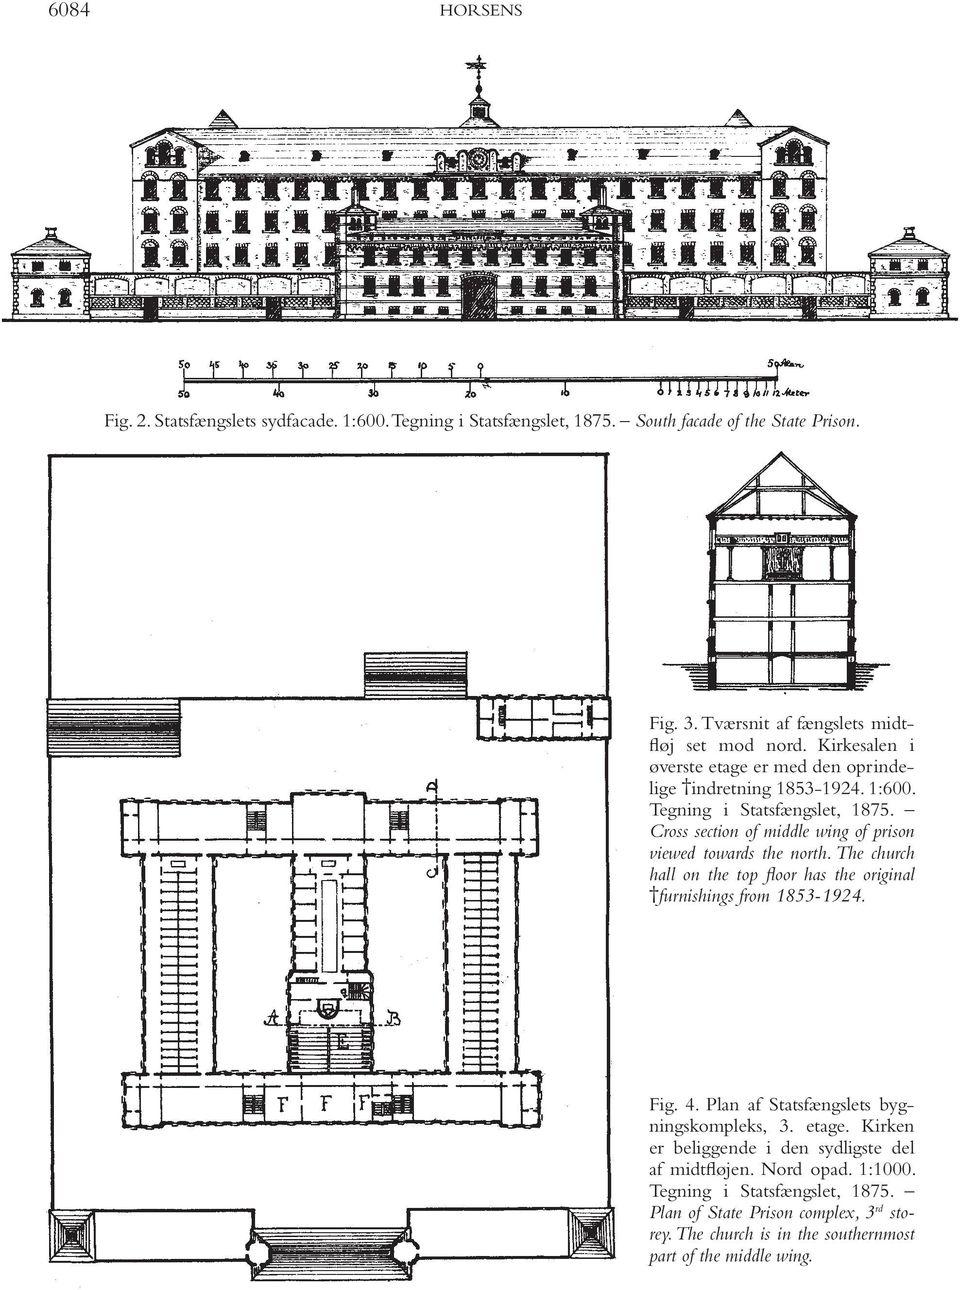 Cross section of middle wing of prison viewed towards the north. The church hall on the top floor has the original furnishings from 1853-1924. Fig. 4.